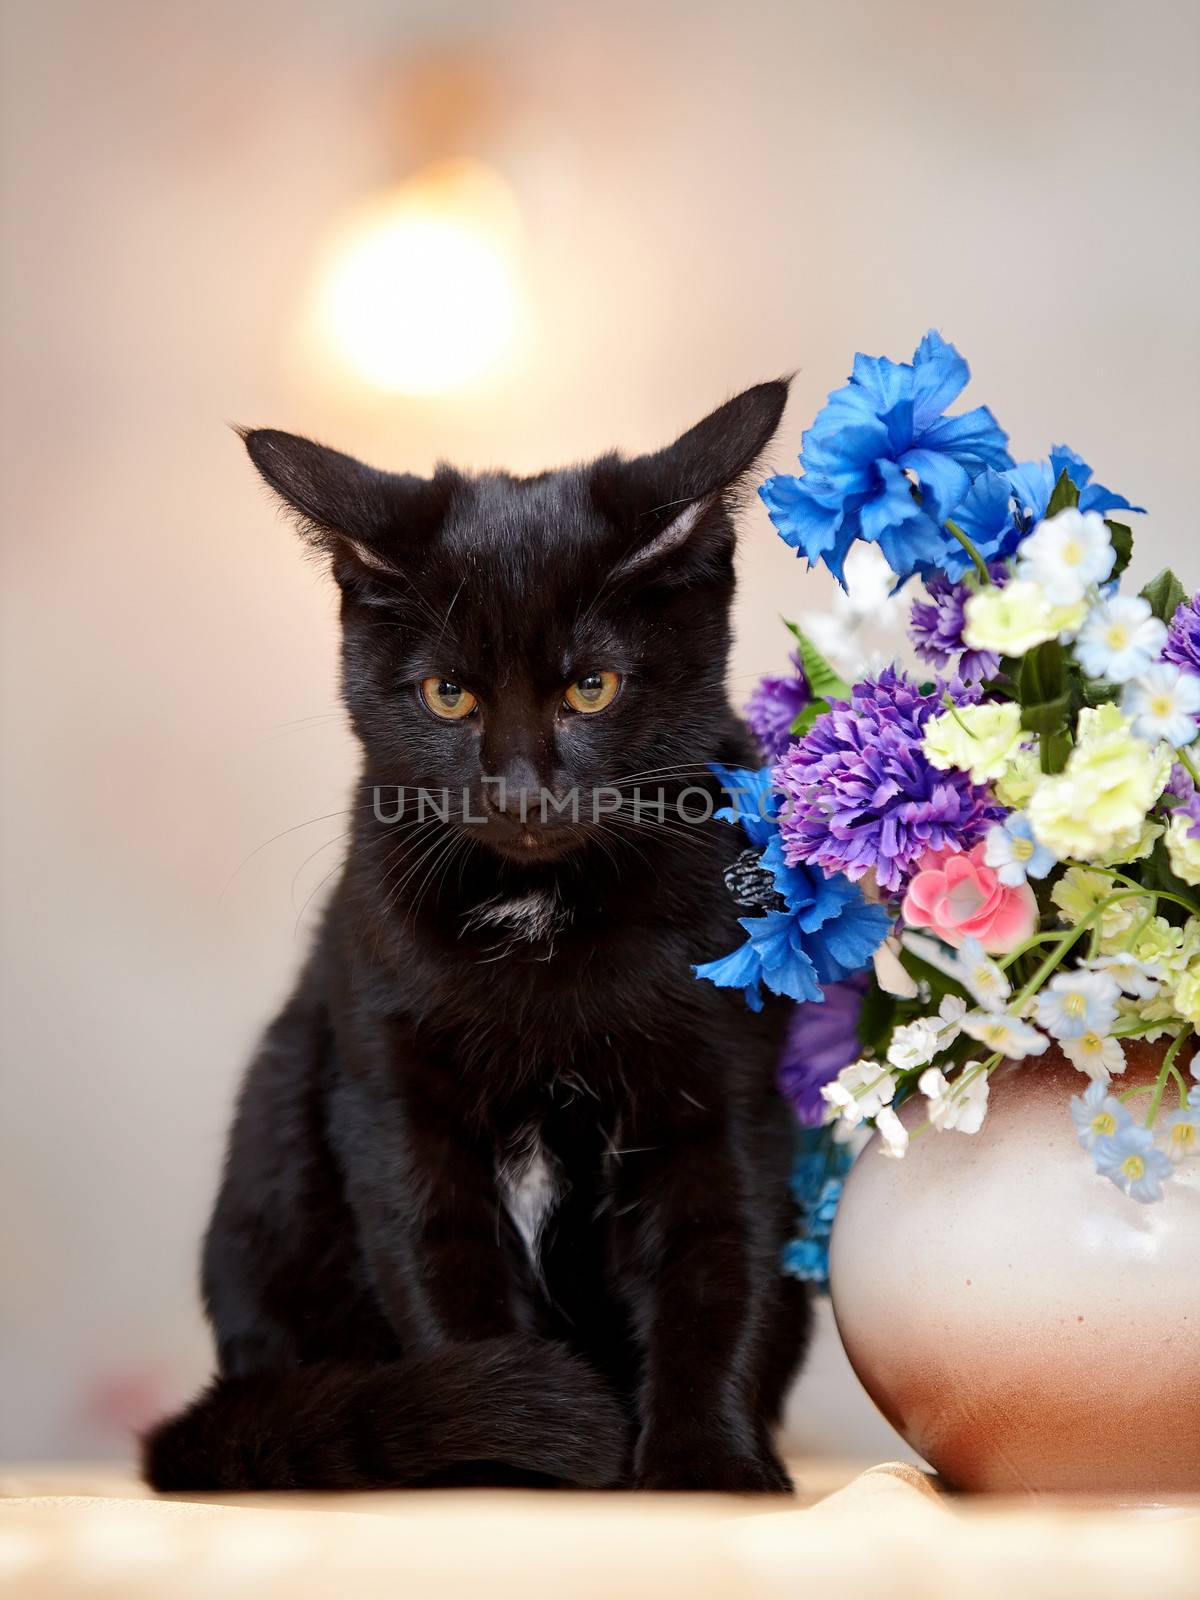 The black cat sits near a vase with the flowers. Black kitten. Black cat. Small predator.